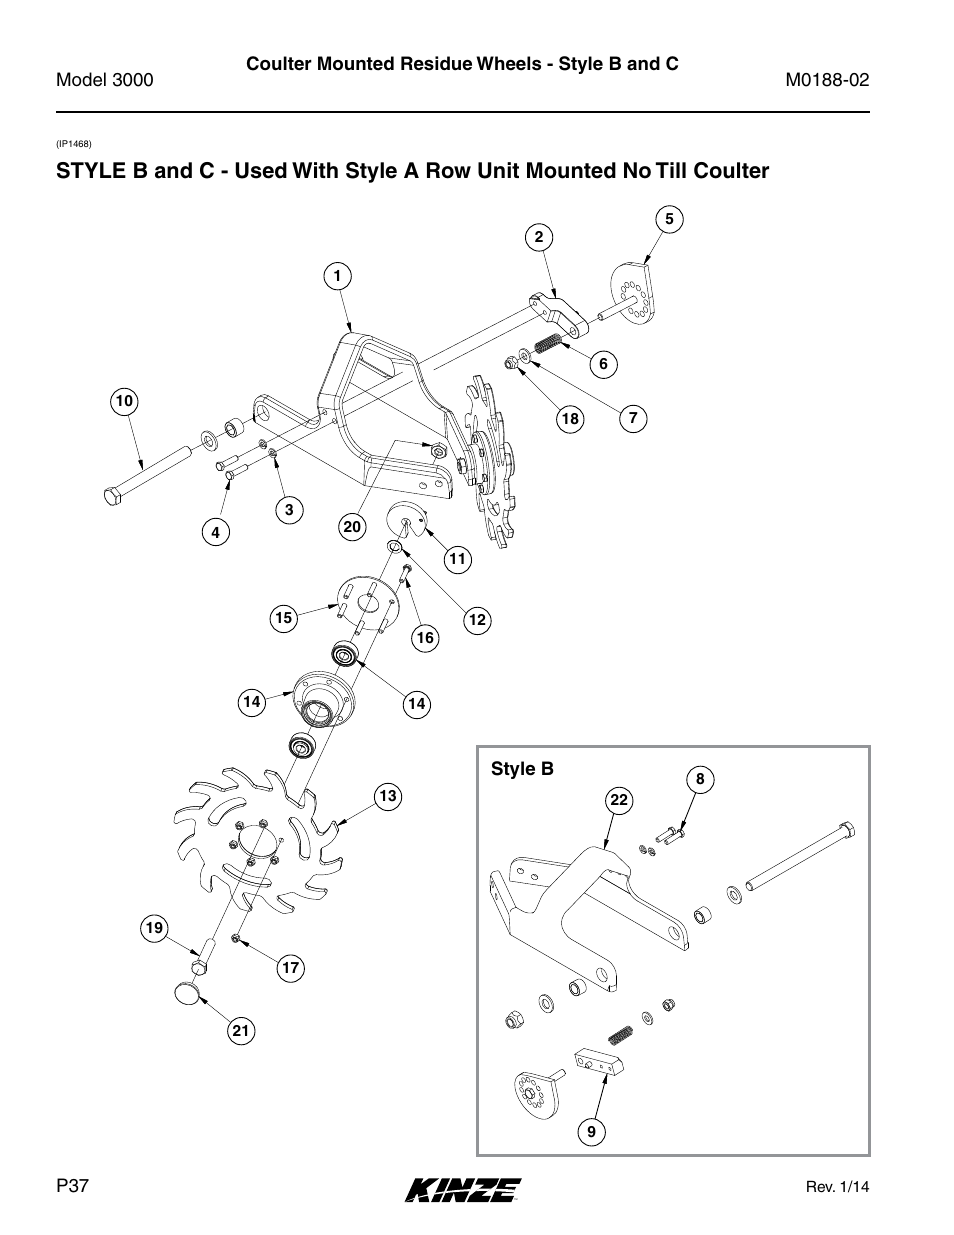 Coulter mounted residue wheels - style b and c | Kinze 3000 Rigid Frame Planter Rev. 5/14 User Manual | Page 40 / 154